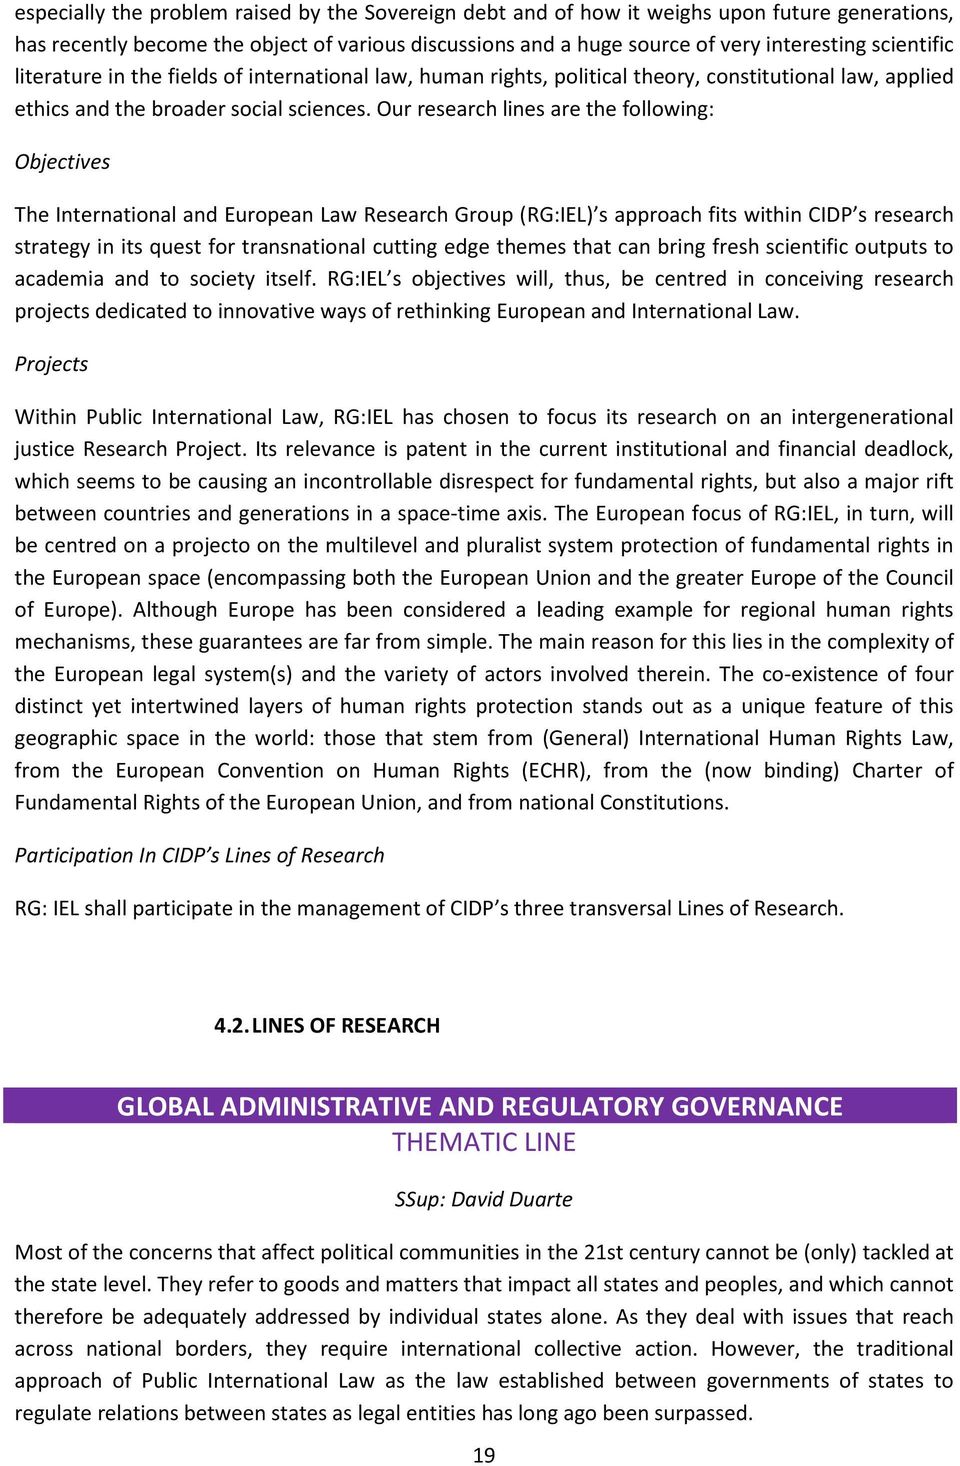 Our research lines are the following: Objectives The International and European Law Research Group (RG:IEL) s approach fits within CIDP s research strategy in its quest for transnational cutting edge